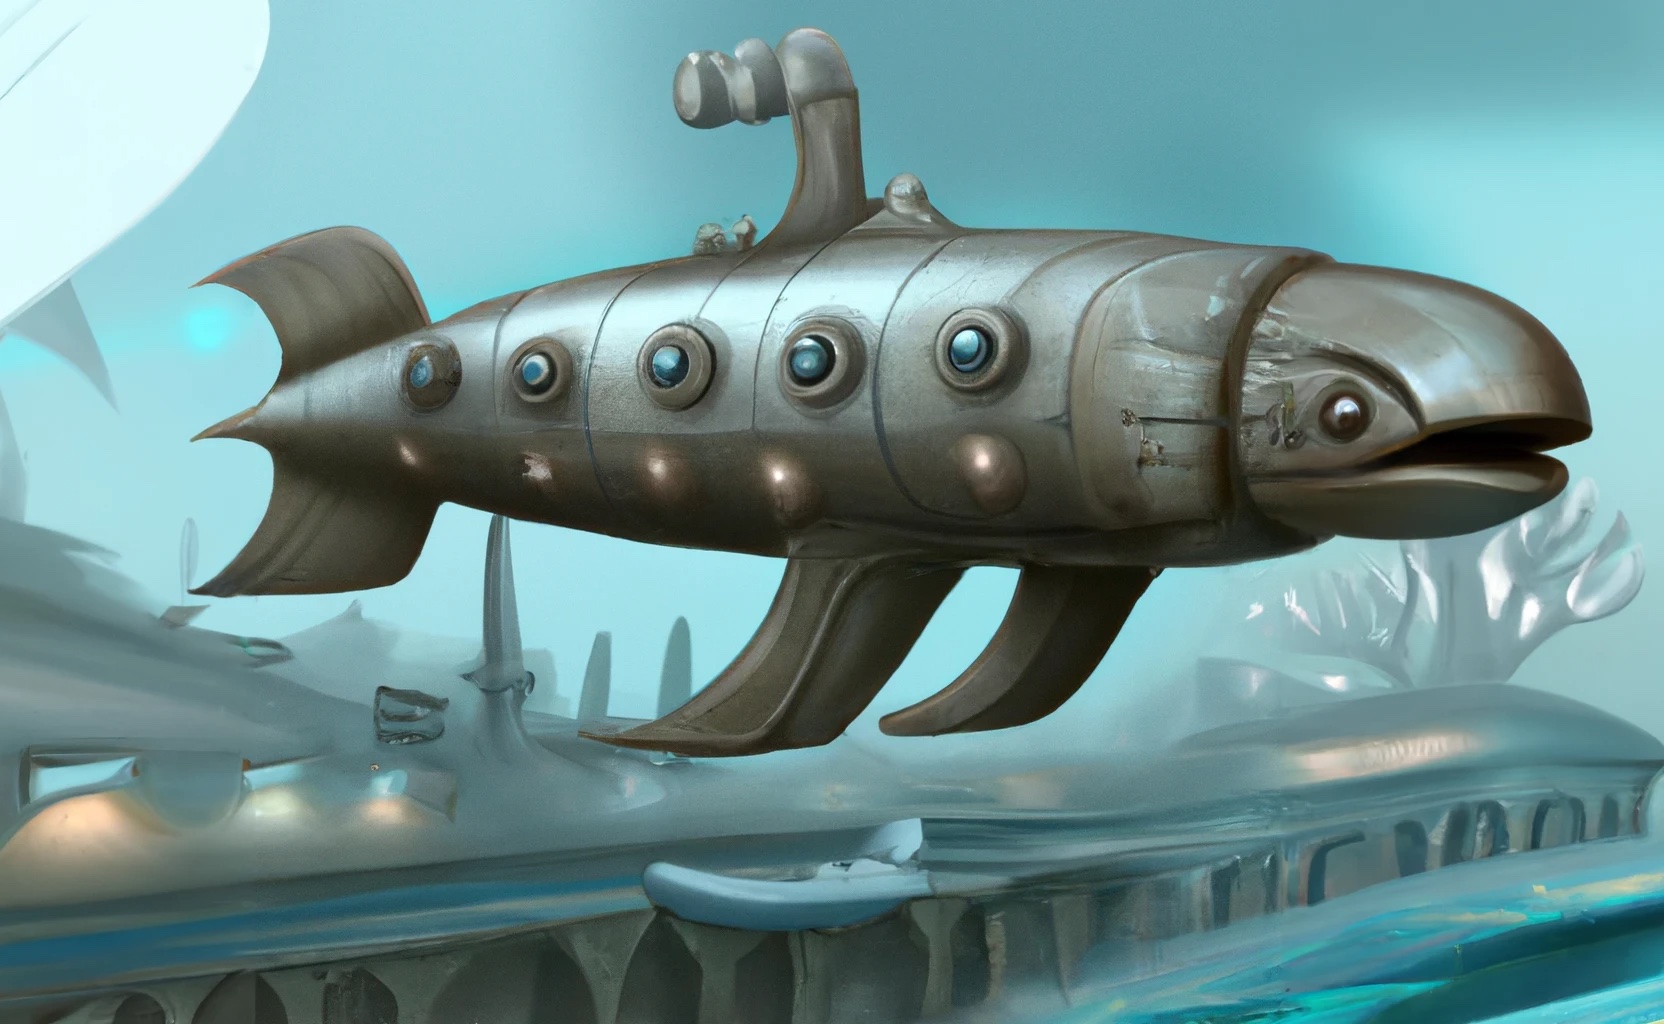 fish submarine chimera with metal body and fins sticking out the side